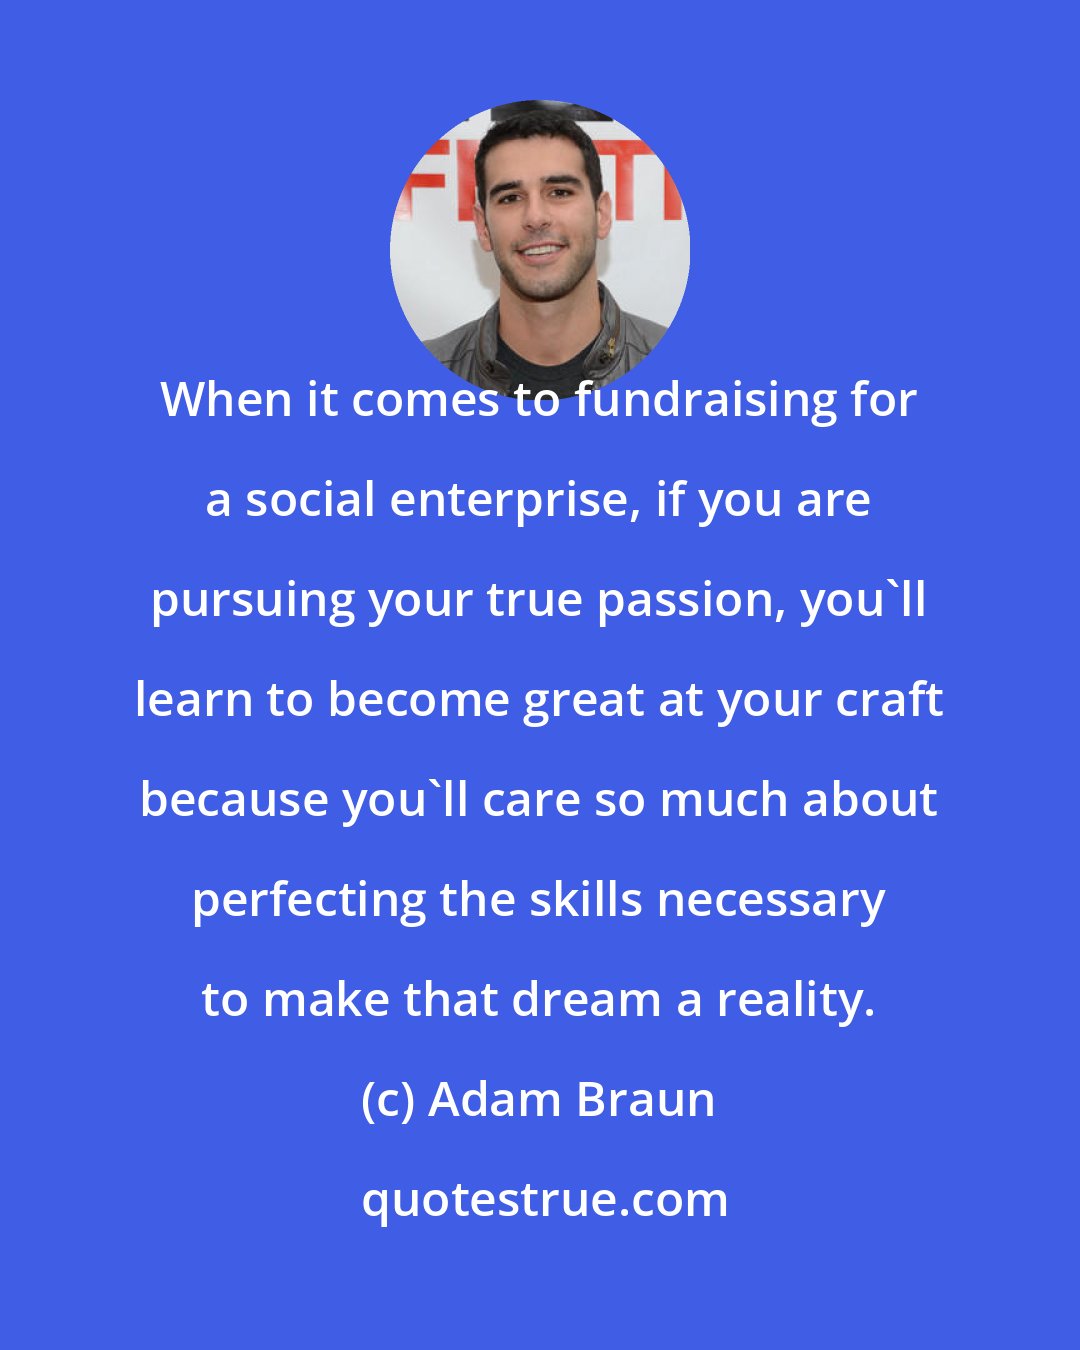 Adam Braun: When it comes to fundraising for a social enterprise, if you are pursuing your true passion, you'll learn to become great at your craft because you'll care so much about perfecting the skills necessary to make that dream a reality.